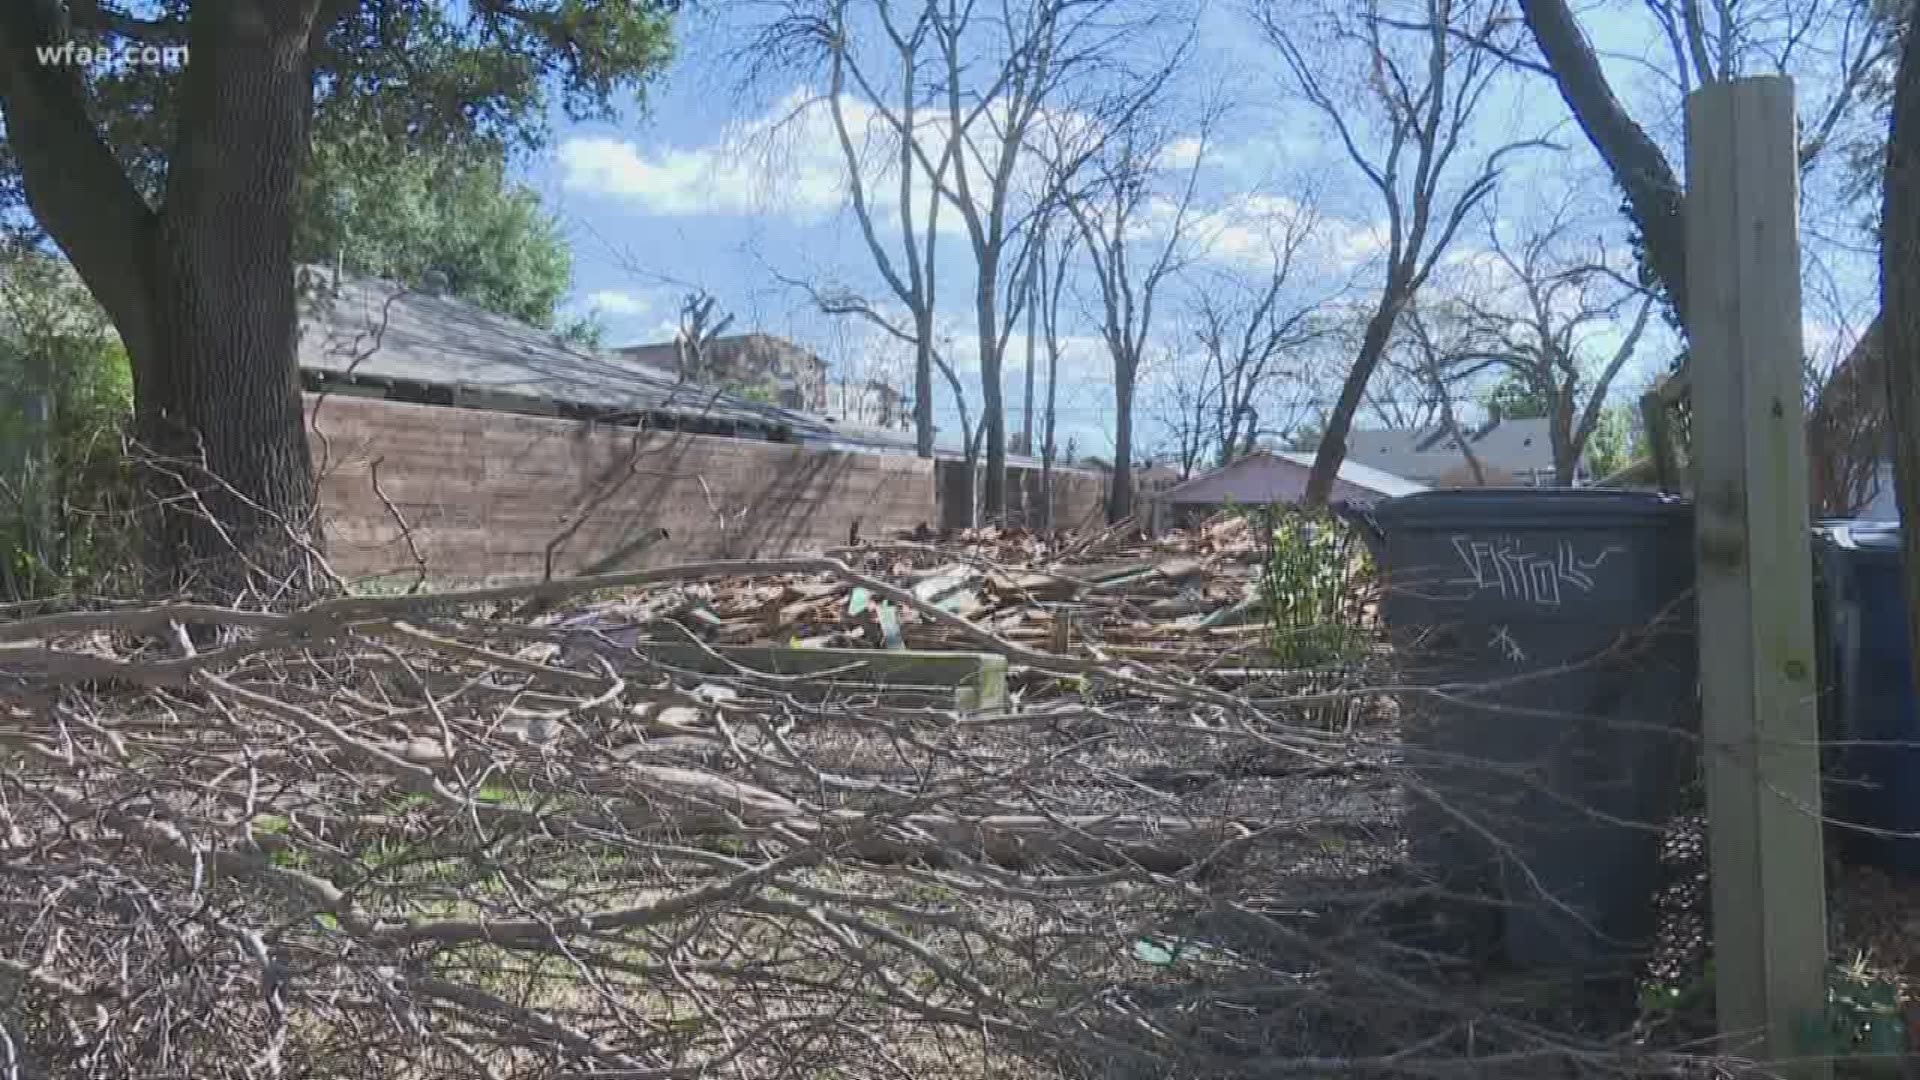 "The house wasn't marked and had no power, no gas. All I can say is I'm sorry it's our worst mistake, and we'll make it right," the demolition company's owner said.